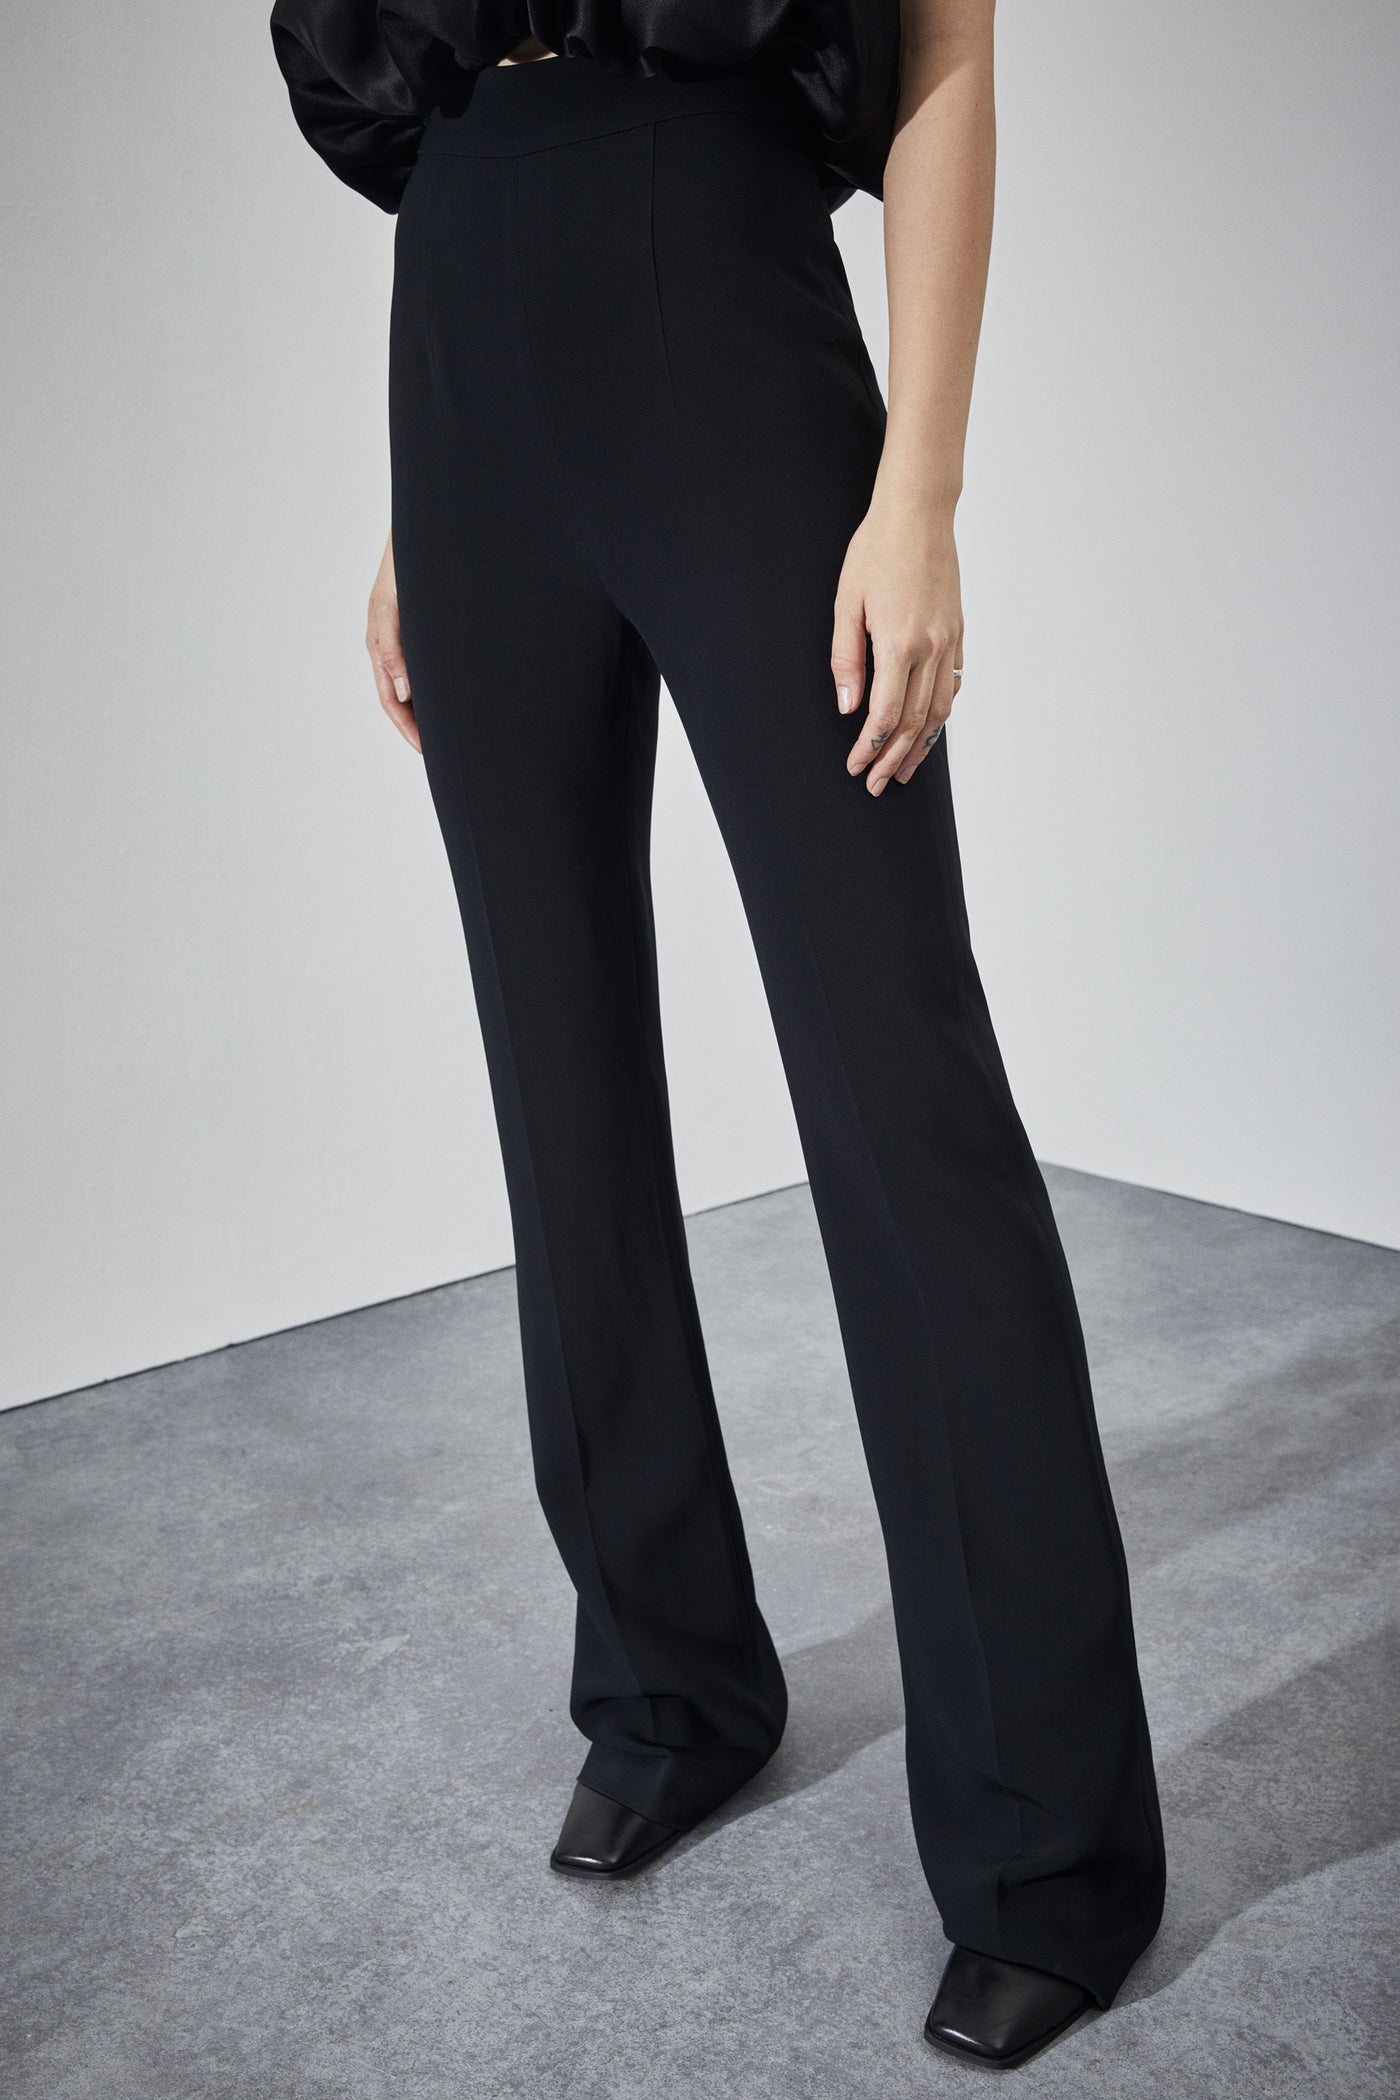 High-Waisted Fit & Flare Pants